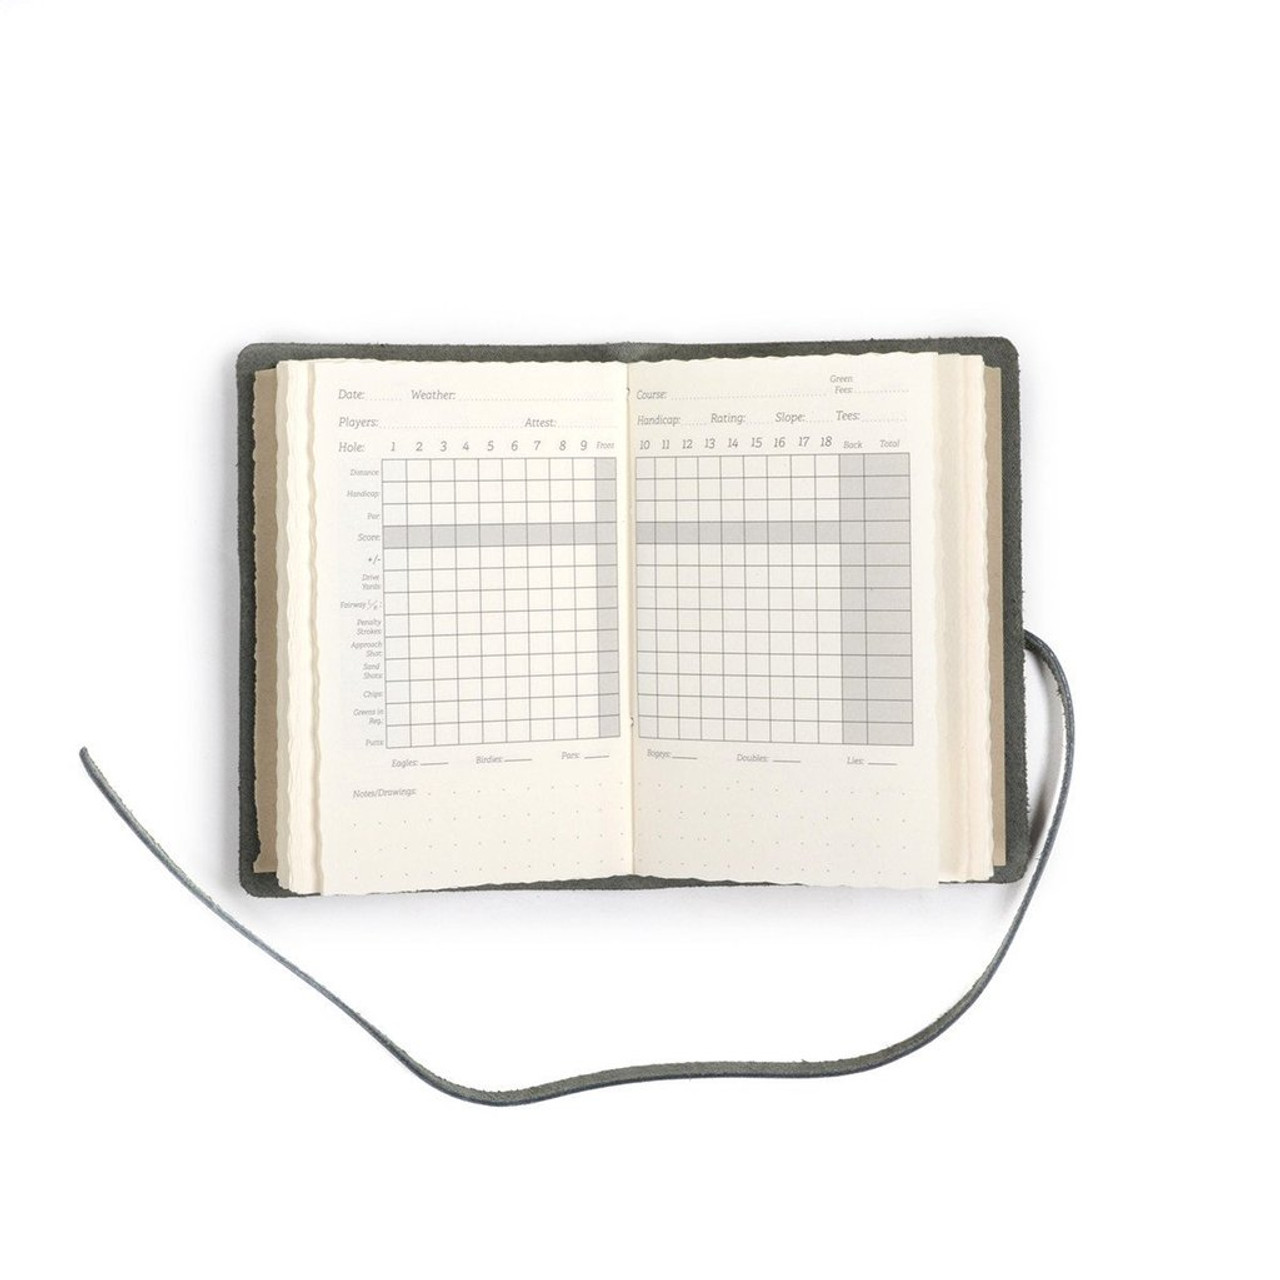 Rustico Leather Golf Log Book - inside pages